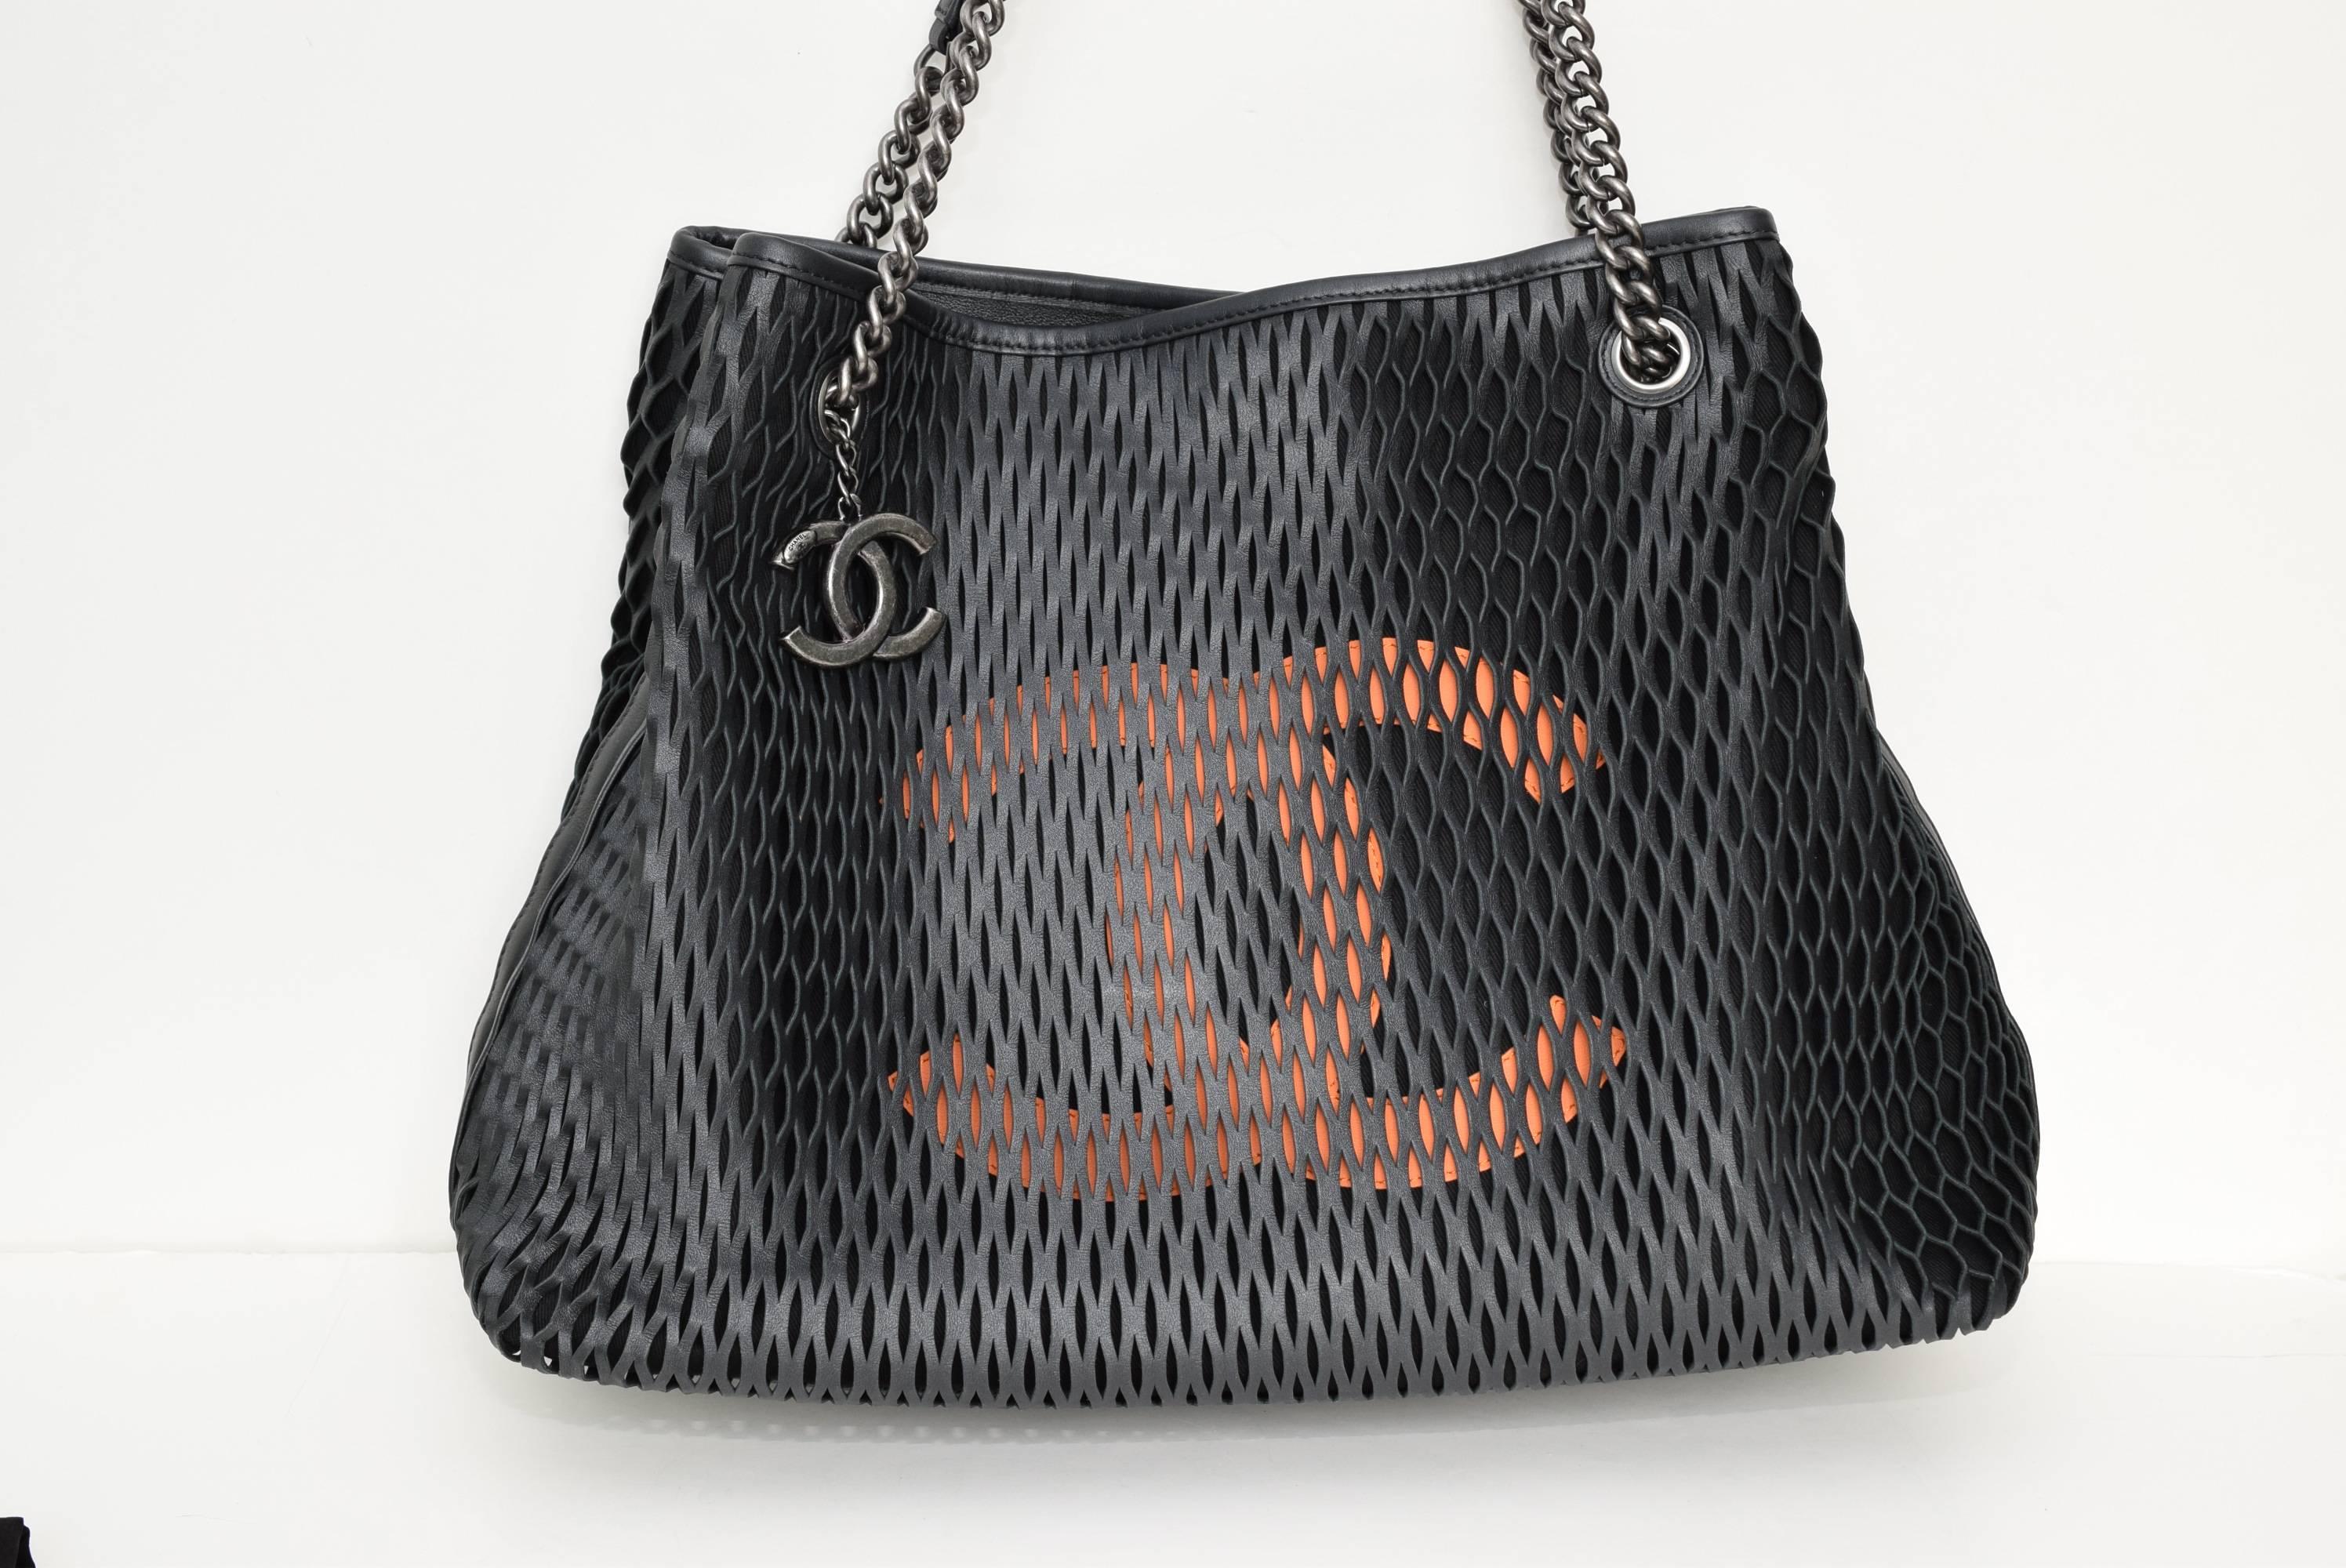 Brand New, never worn Chanel Black tote bag, embellished with a large orange CC logo on the front. Great CC signature Shopping Tote. 
Room for it all!
Comes with with dust bag and guarantee card and Chanel care card.
Free Shipping
Made in